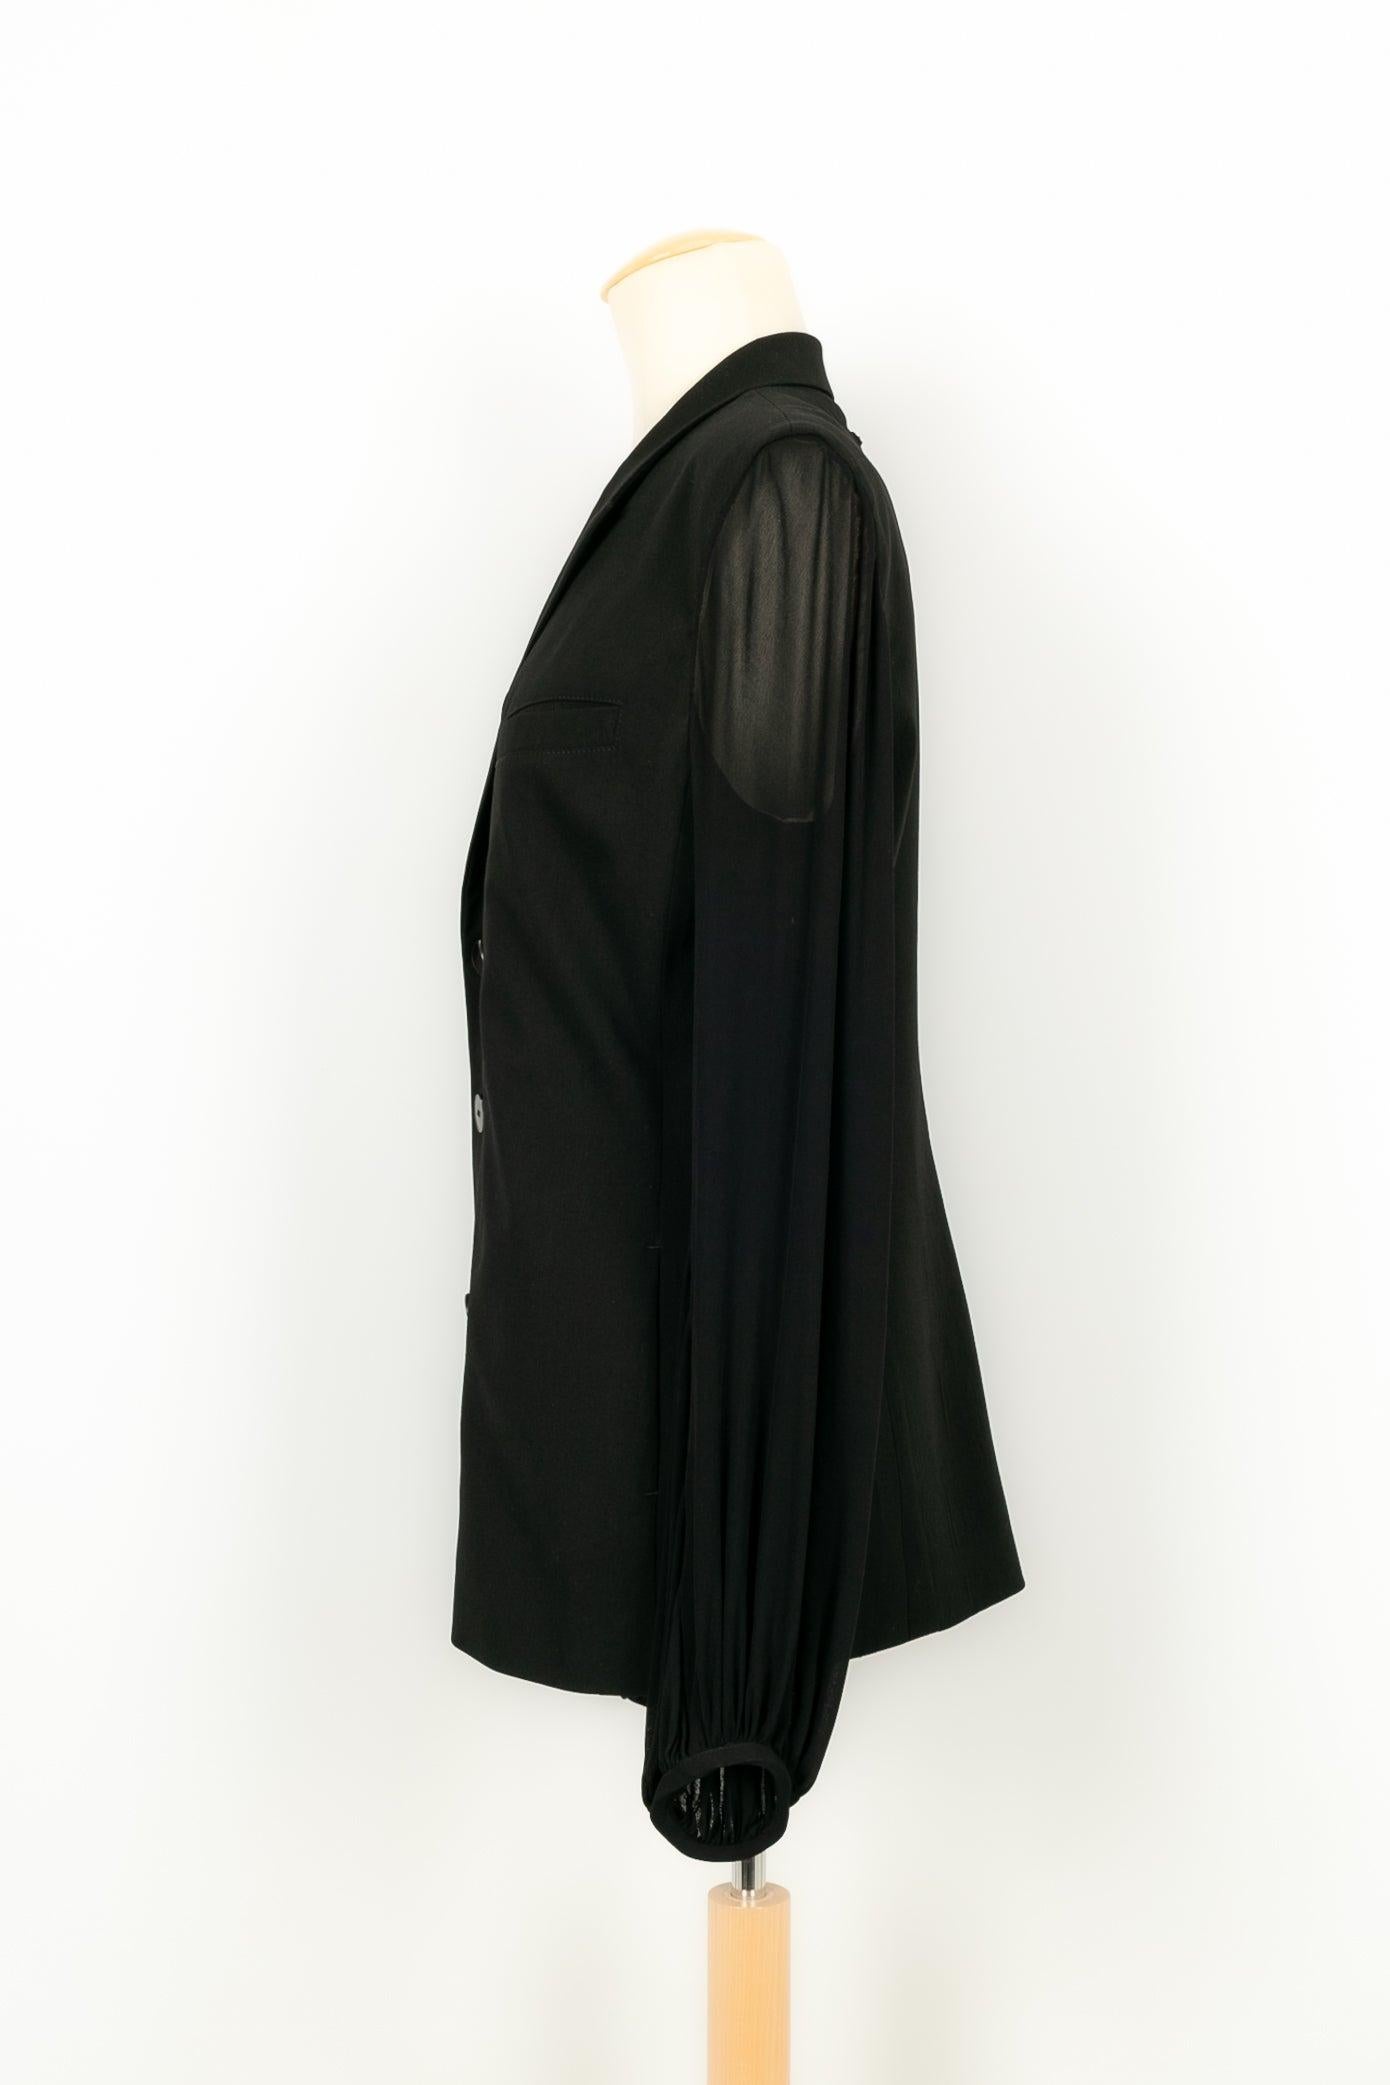 Jean Paul Gaultier - (Made in Italy) Black jacket in blended wool with transparent sleeves. Indicated size 42FR. To be noted, a few worn marks.

Additional information:
Condition: Good condition
Dimensions: Shoulder width: 41 cm - Chest: 49 cm -